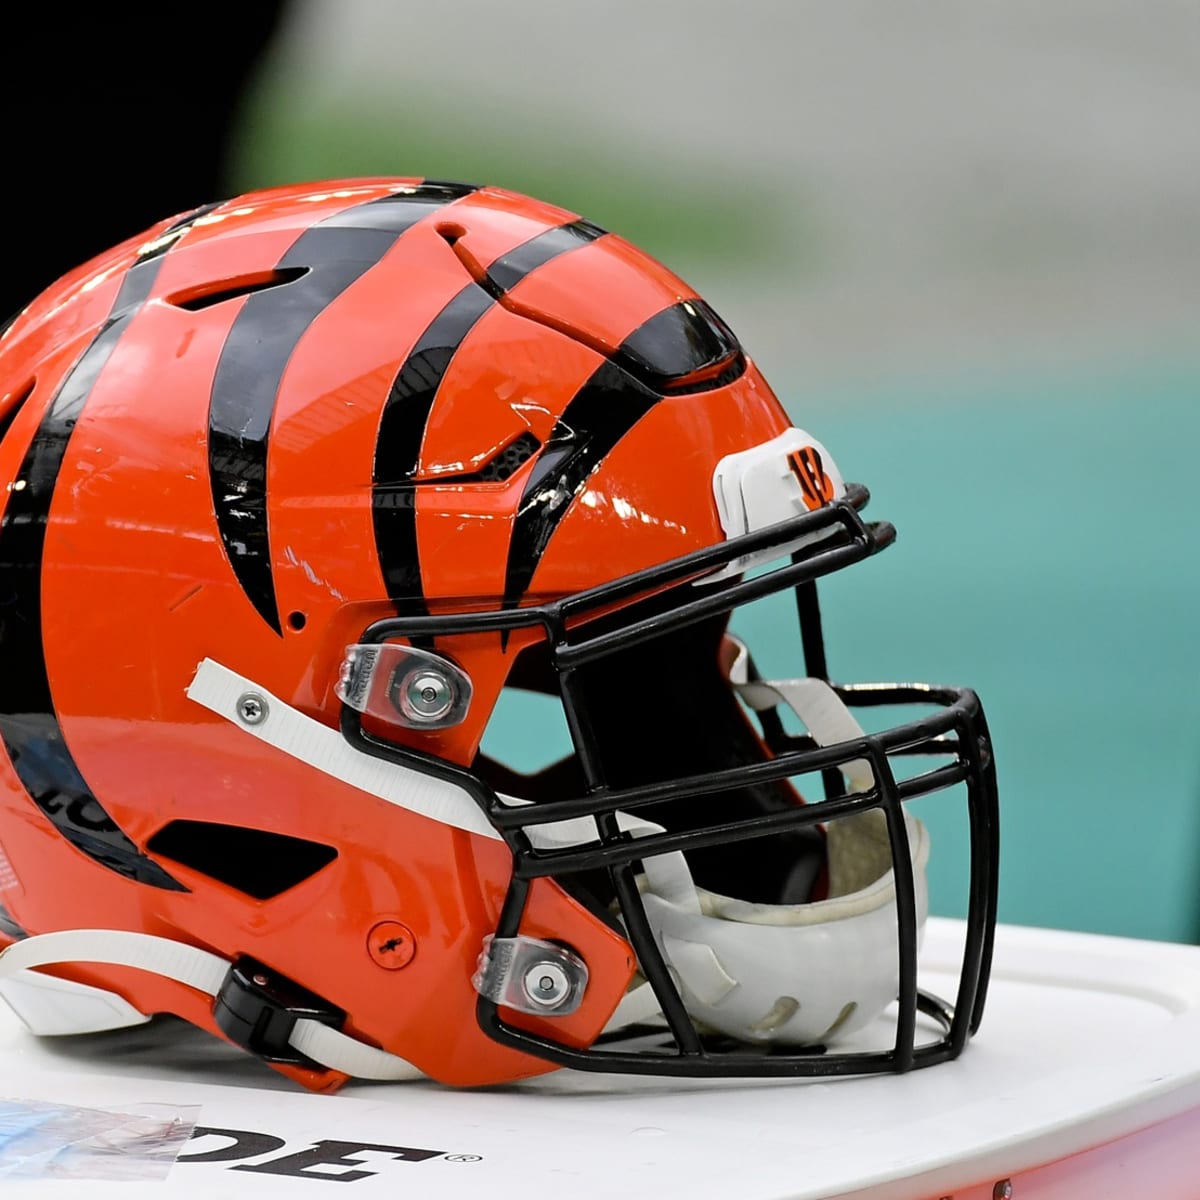 LOOK: Bengals debut all-white uniforms, helmet on Thursday Night